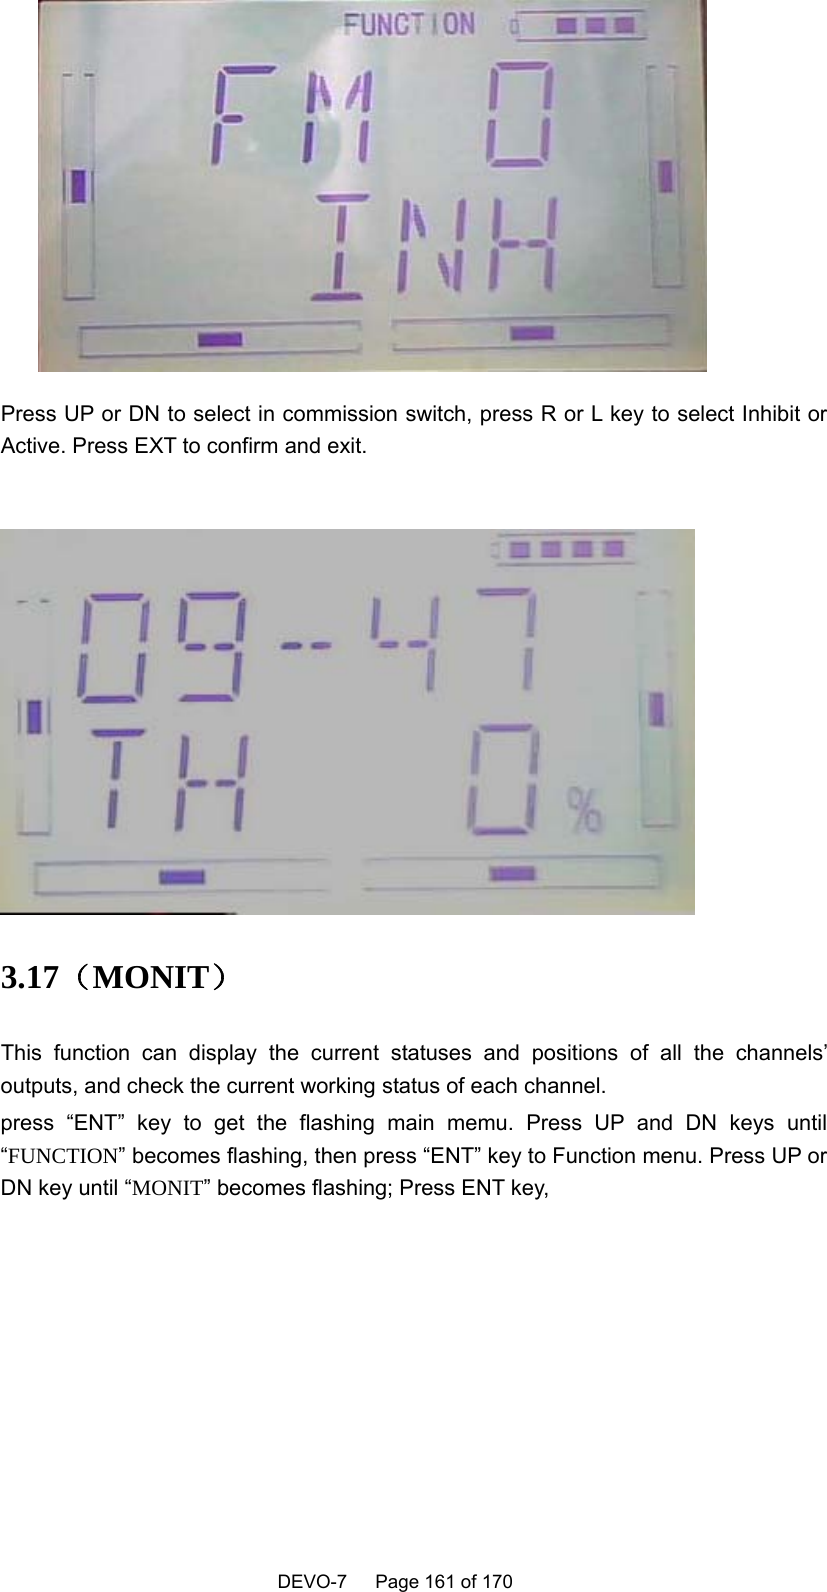    DEVO-7   Page 161 of 170    Press UP or DN to select in commission switch, press R or L key to select Inhibit or Active. Press EXT to confirm and exit.   3.17（MONIT） This function can display the current statuses and positions of all the channels’ outputs, and check the current working status of each channel. press “ENT” key to get the flashing main memu. Press UP and DN keys until “FUNCTION” becomes flashing, then press “ENT” key to Function menu. Press UP or DN key until “MONIT” becomes flashing; Press ENT key,     